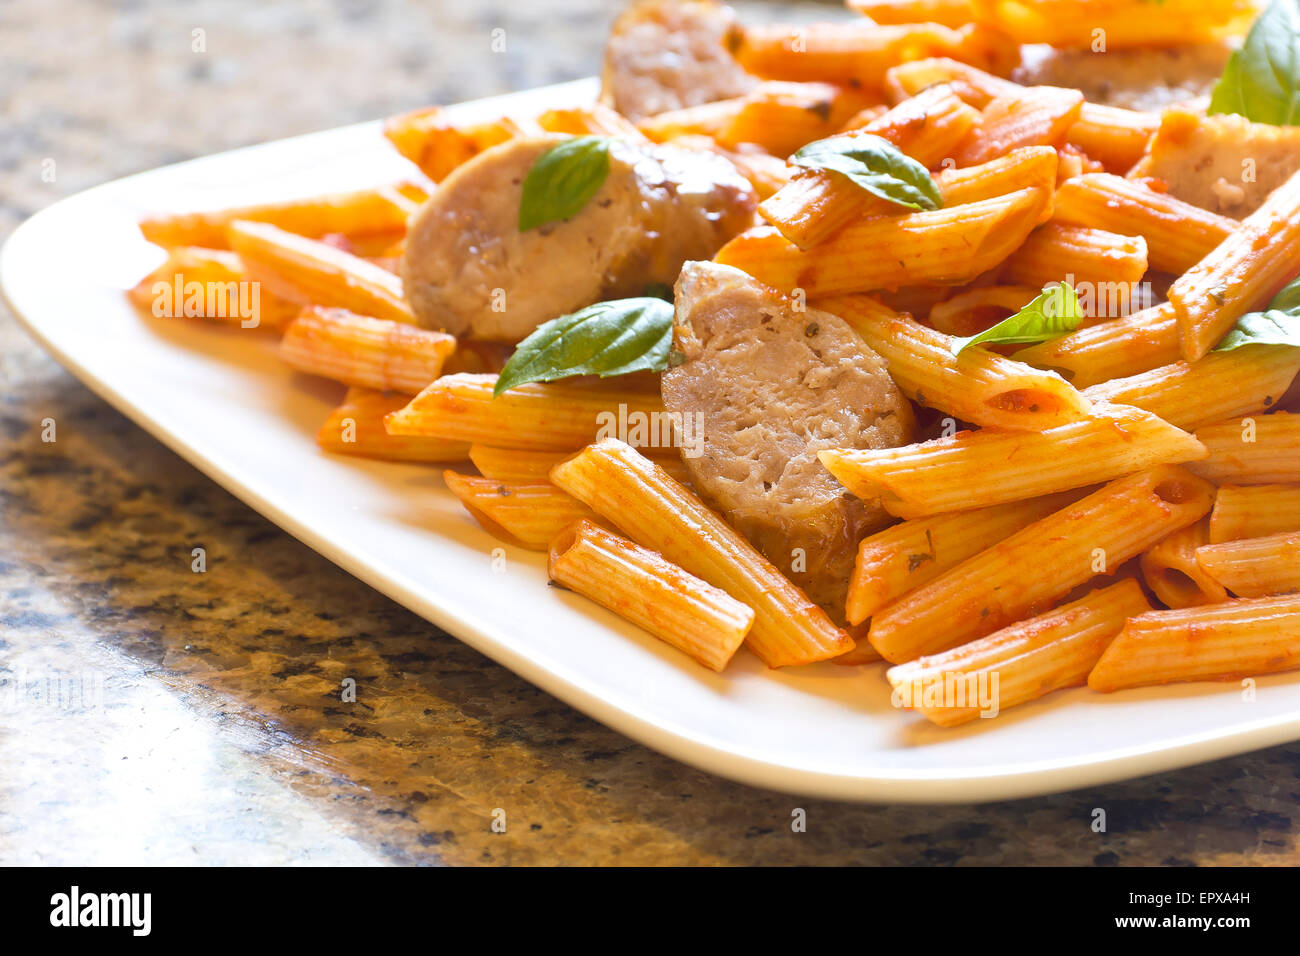 Sliced sausage with penne pasta and red tomato sauce with basil leaves Stock Photo